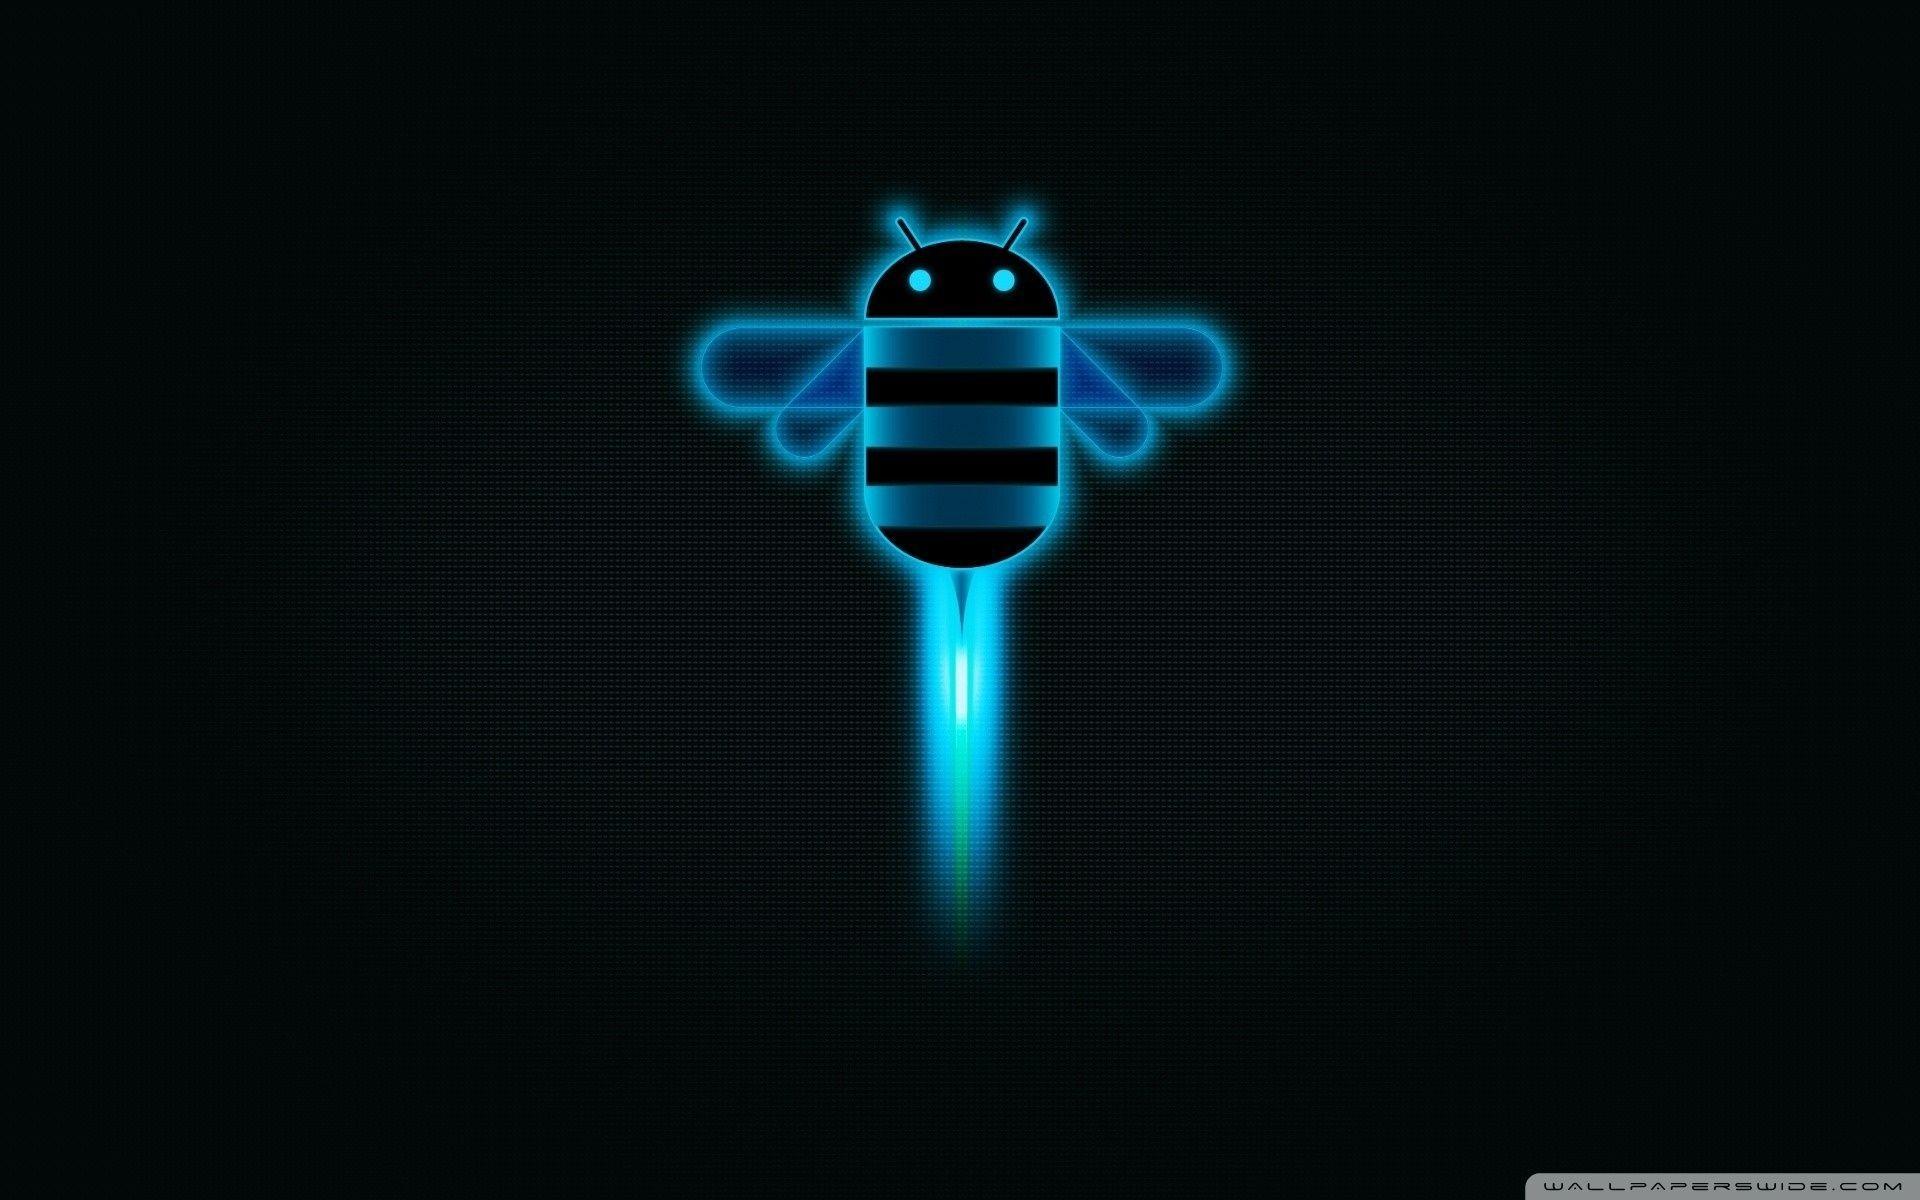 Cool HD Logo - Android Logo Wallpaper Black Brands & Logos : Cool Bee Android HD ...